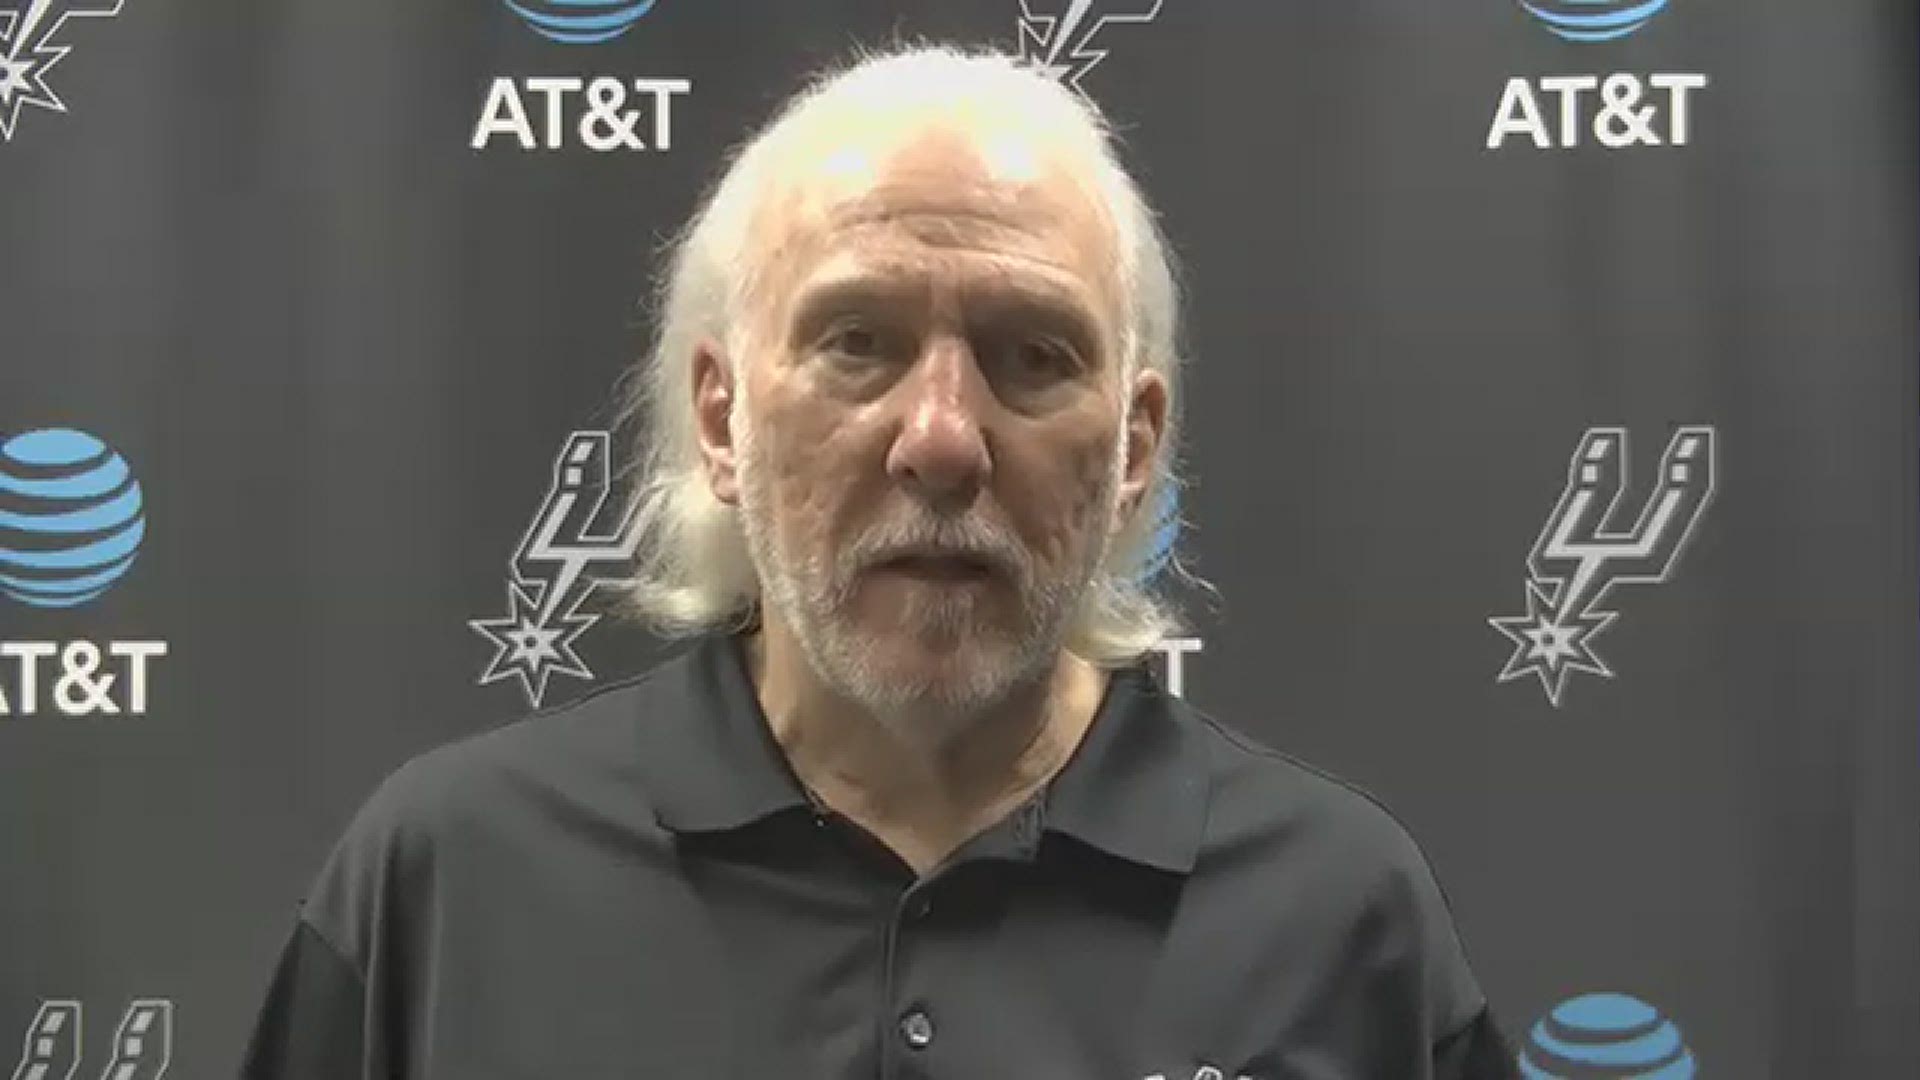 "They got hot on top of us playing poorly on the offensive end, and that was a bad combination and they ended up kicking our butts," Popovich said.